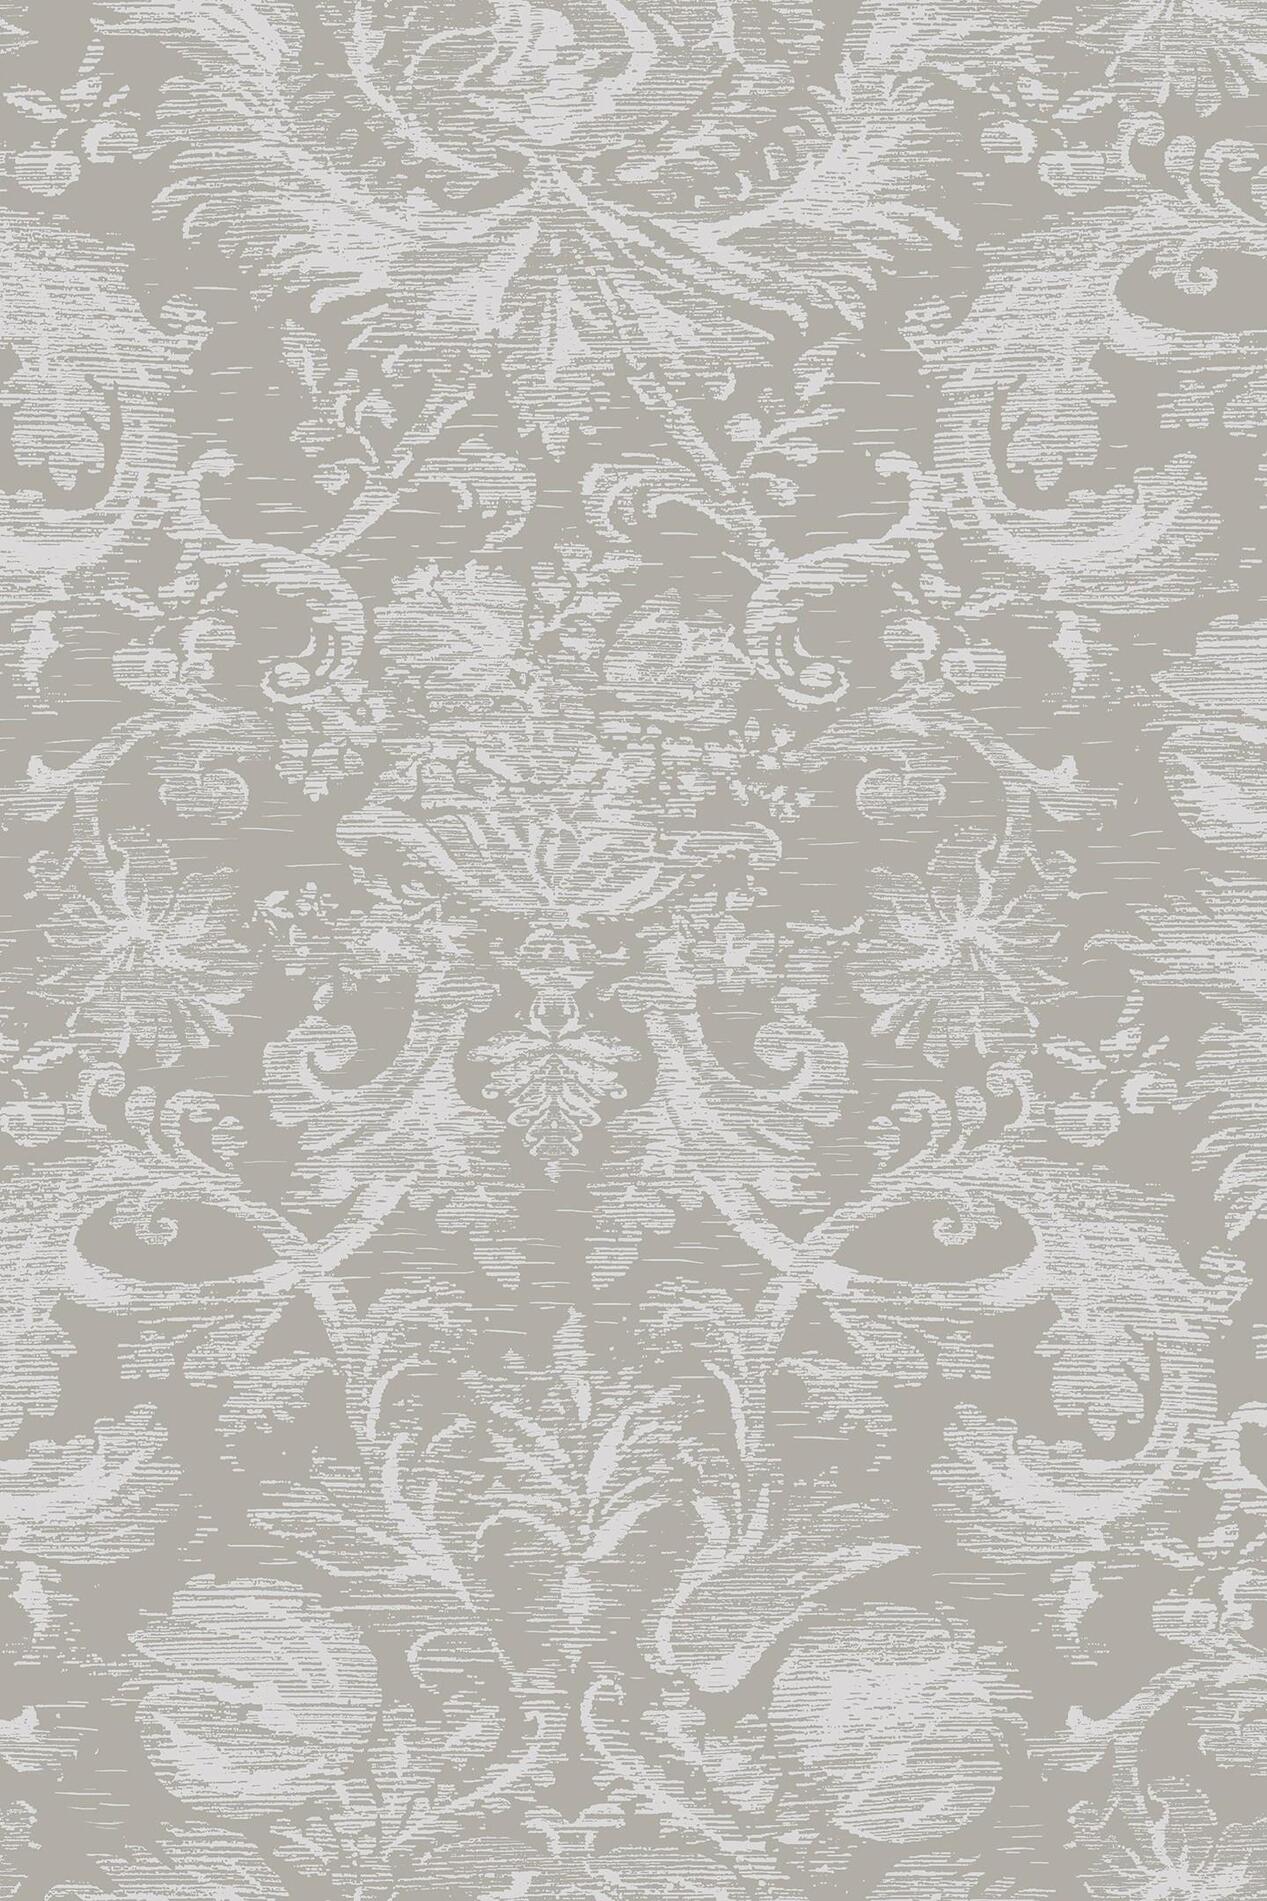 hooked-on-walls-classy-vibes-classy-wallcovering-15504